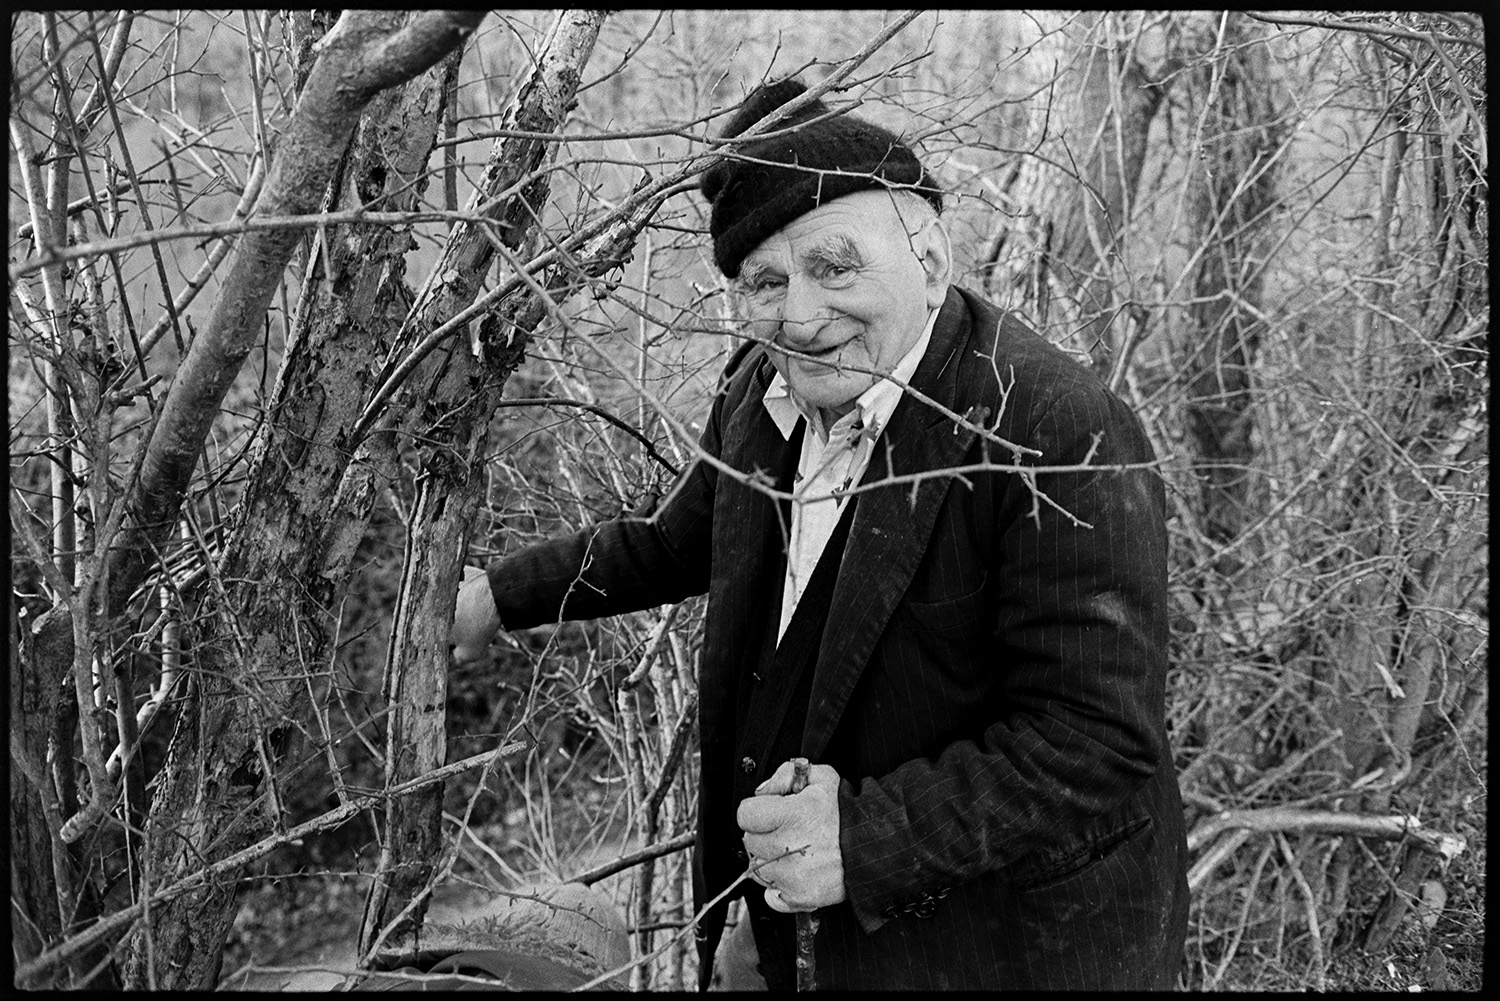 Farmer mending hedge wearing woolly hat. 
[Archie Parkhouse mending a hedge at Millhams, Dolton. He is wearing a woolly hat.]